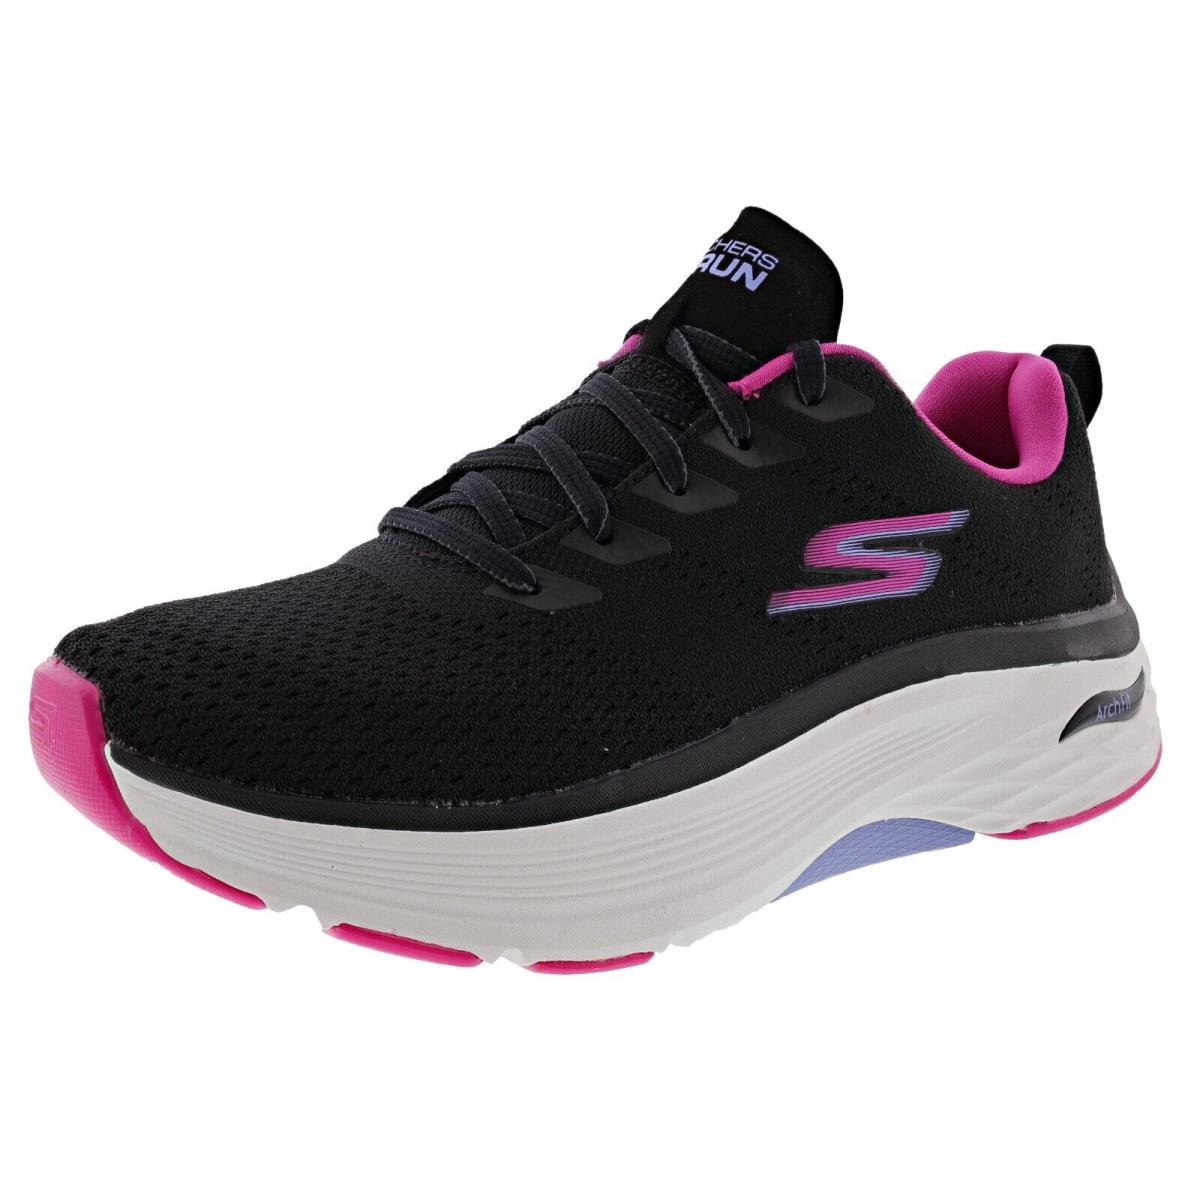 Skechers Women`s Max Cushioning Arch Fit Goodyear Performance Walking Shoes Black / Pink